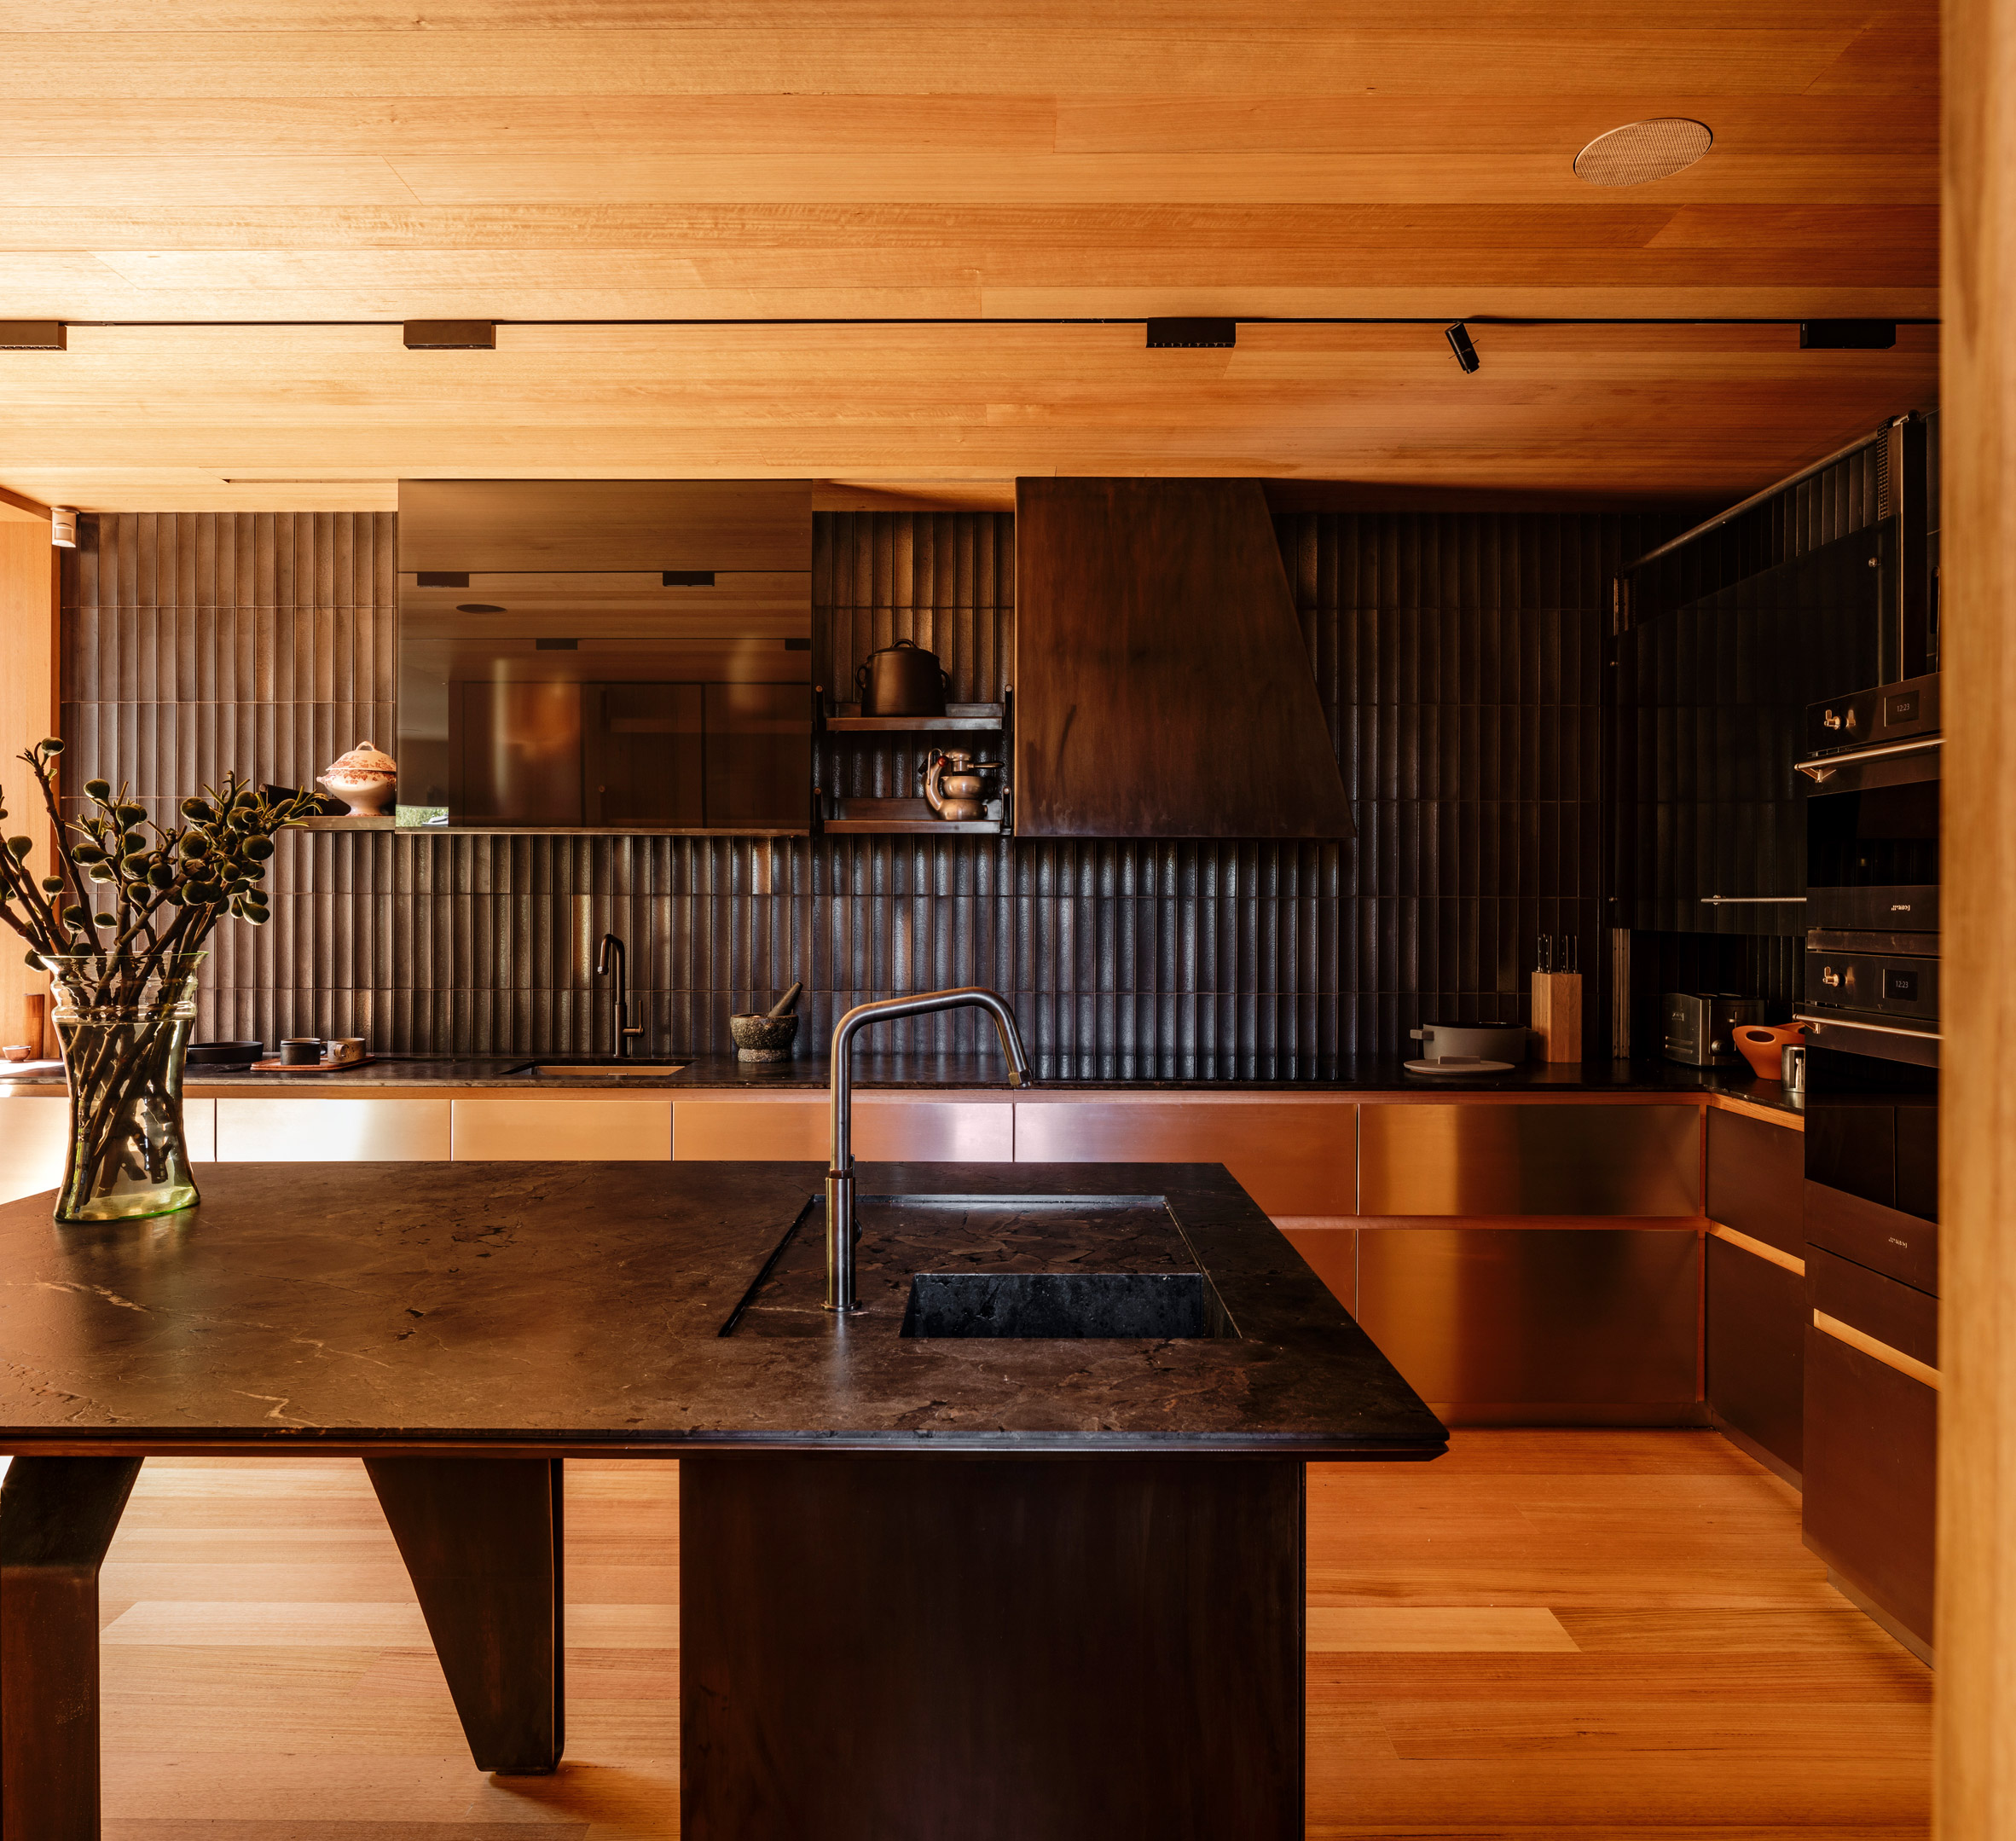 Kitchen with Japanese tiles in Kew Residence by John Wardle Architects in Melbourne, Australia